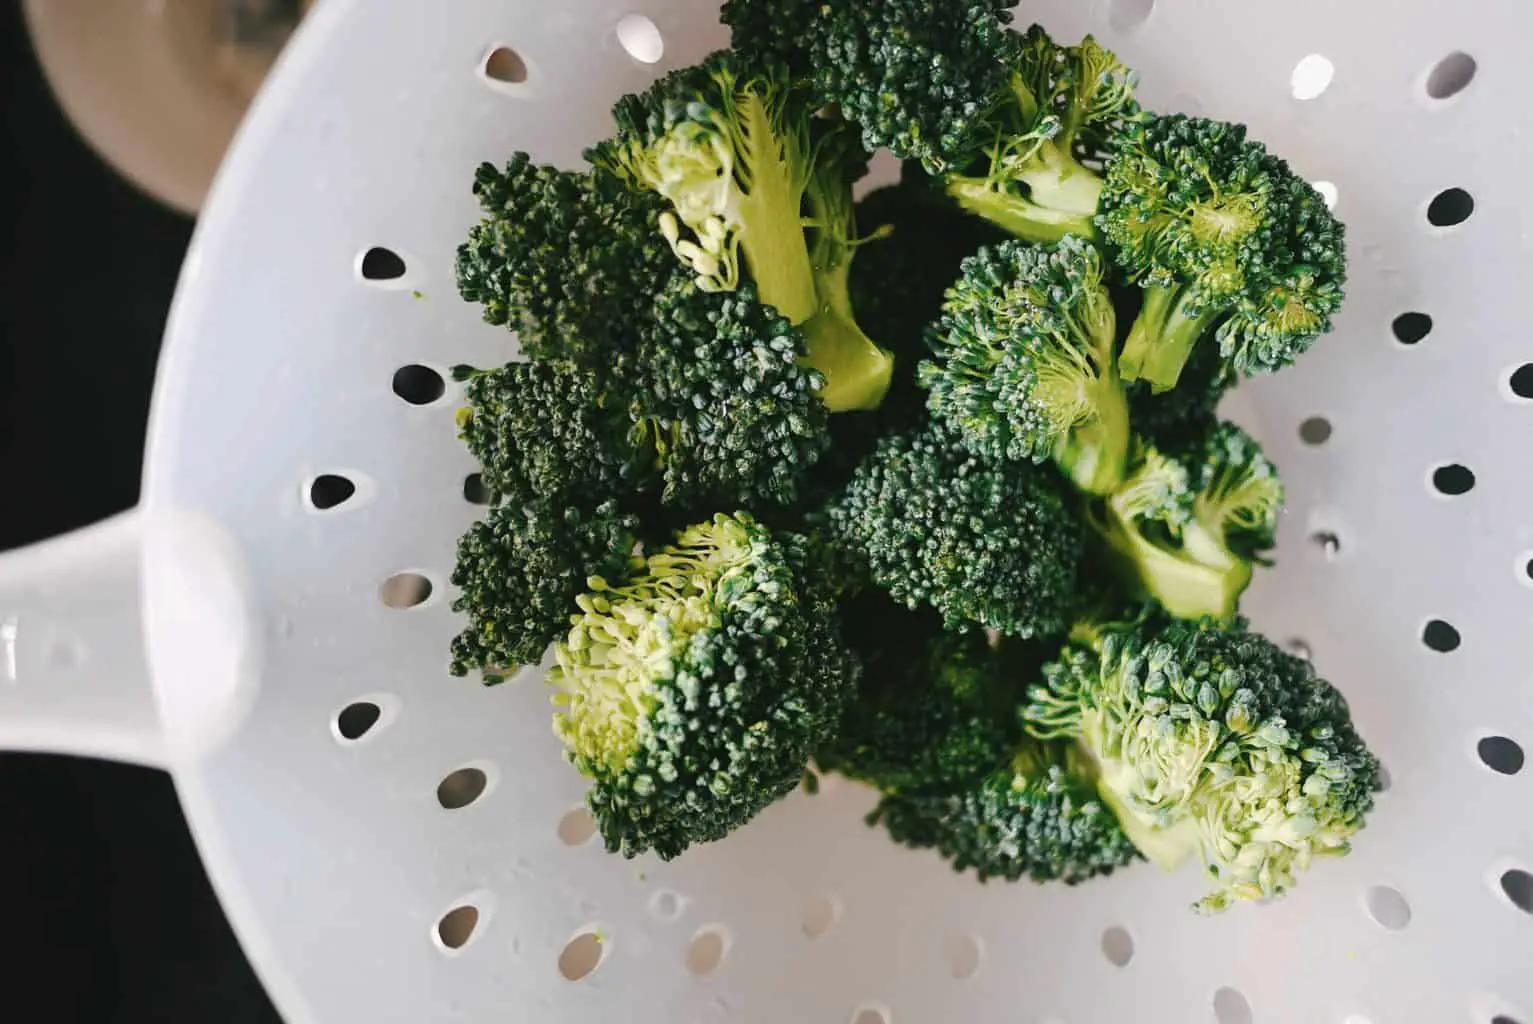 how to clean broccoli